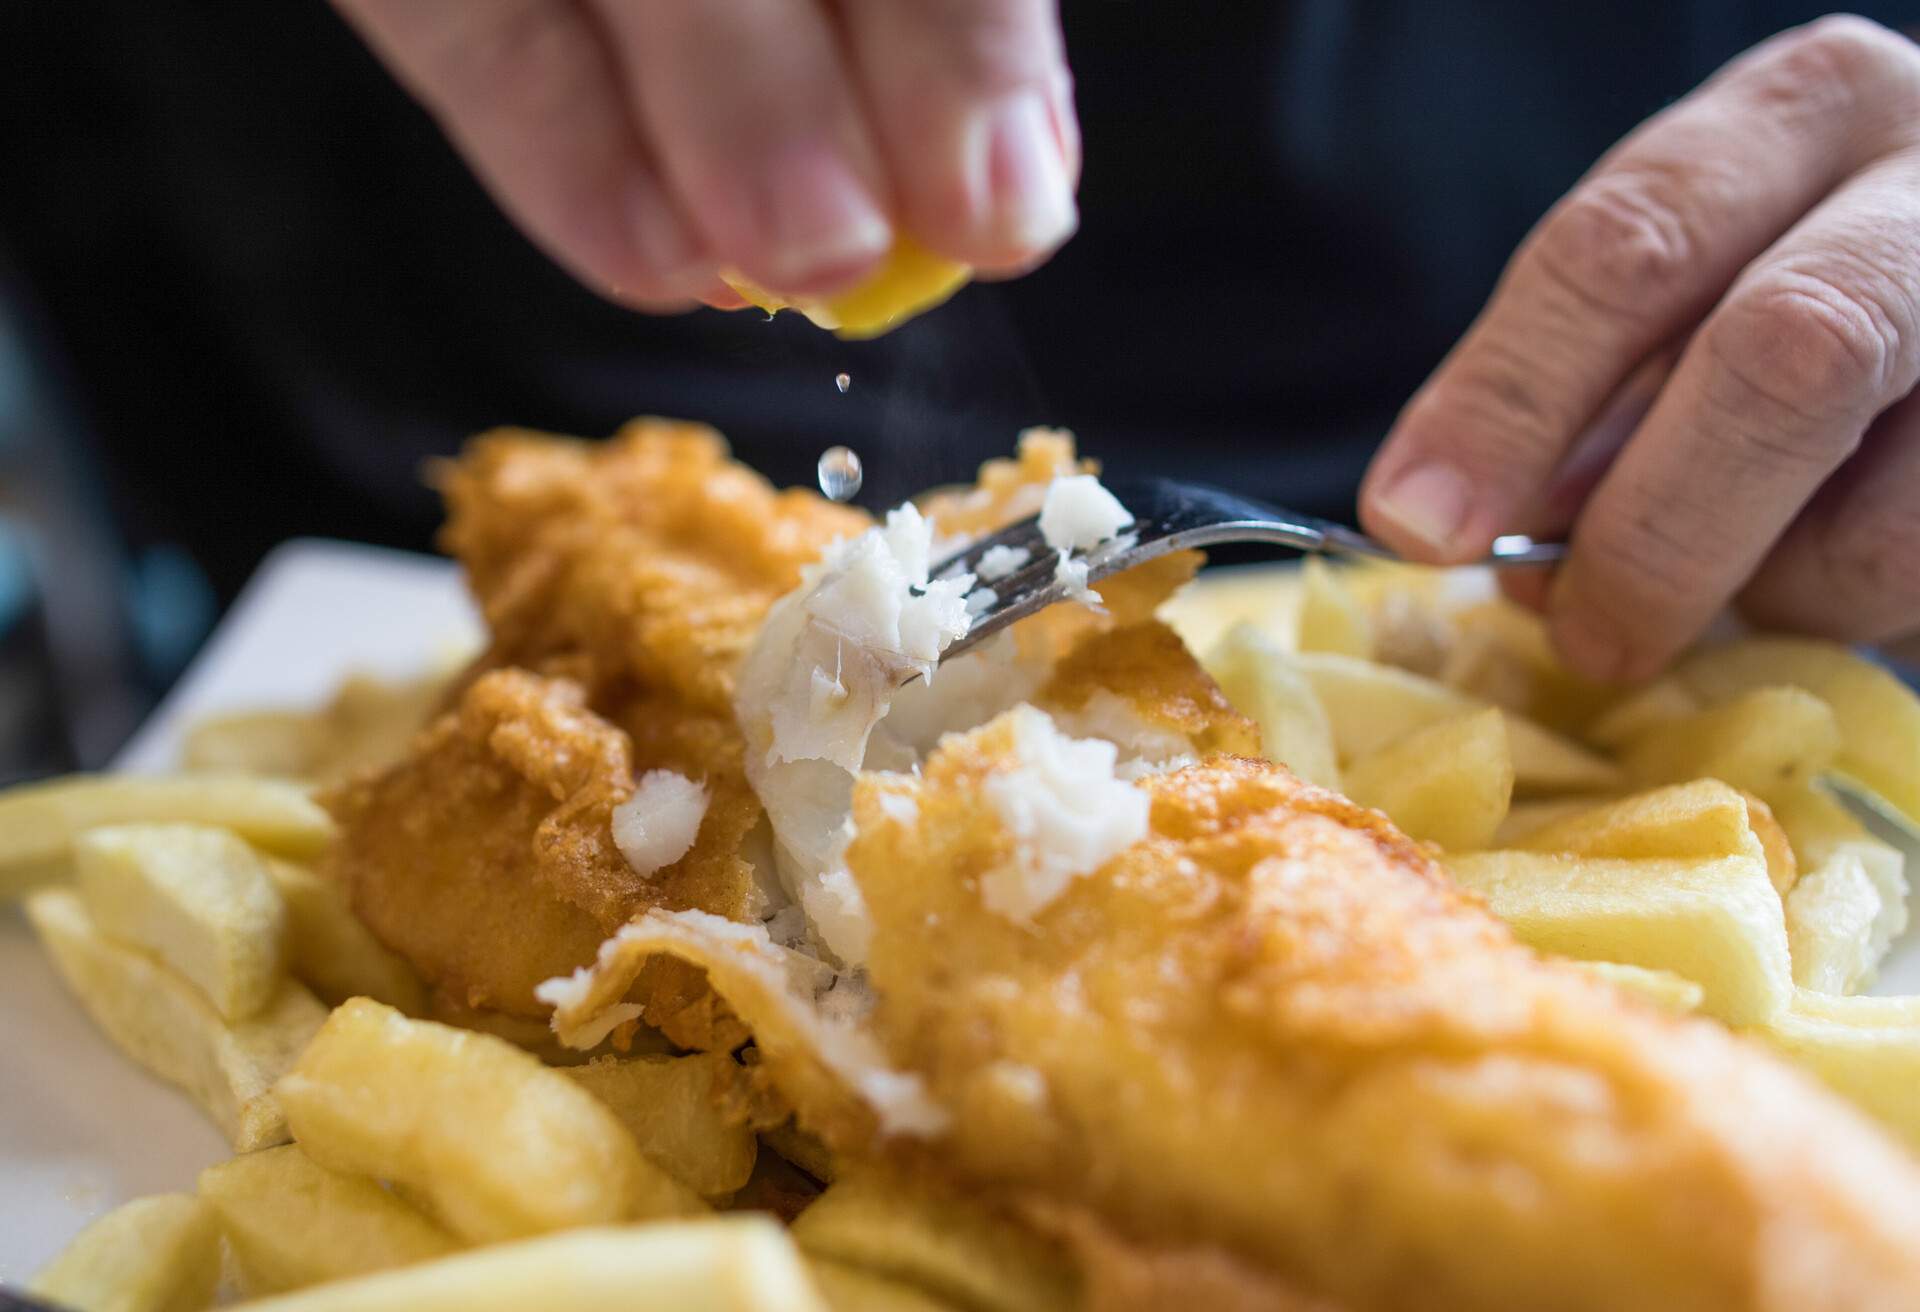 A man squeezing fresh lemon juice over his fish and chips.